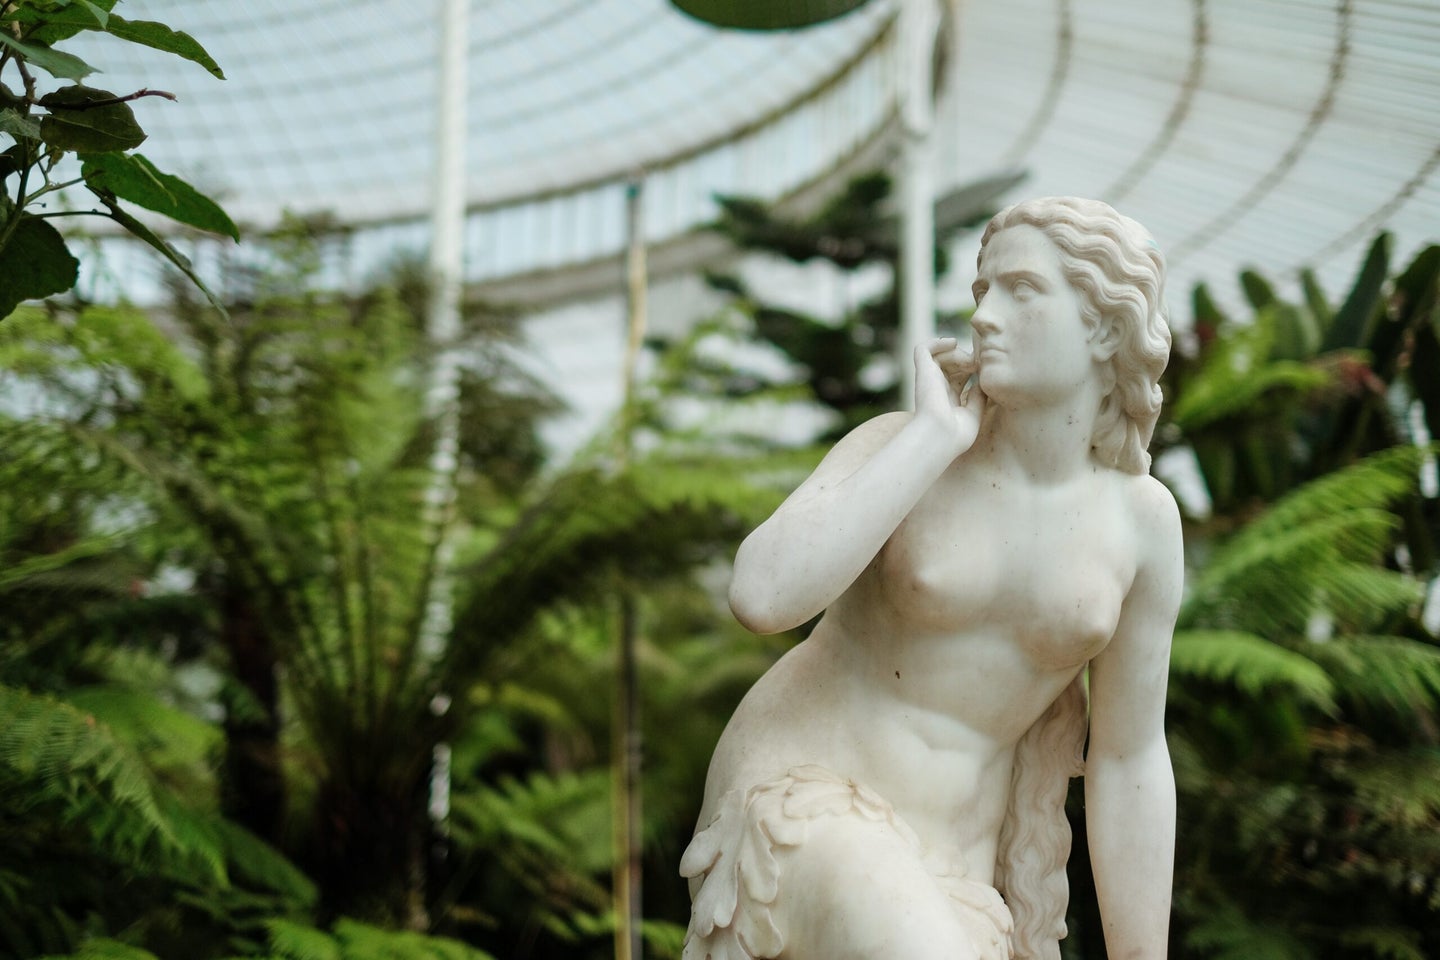 Naked woman statue in garden.